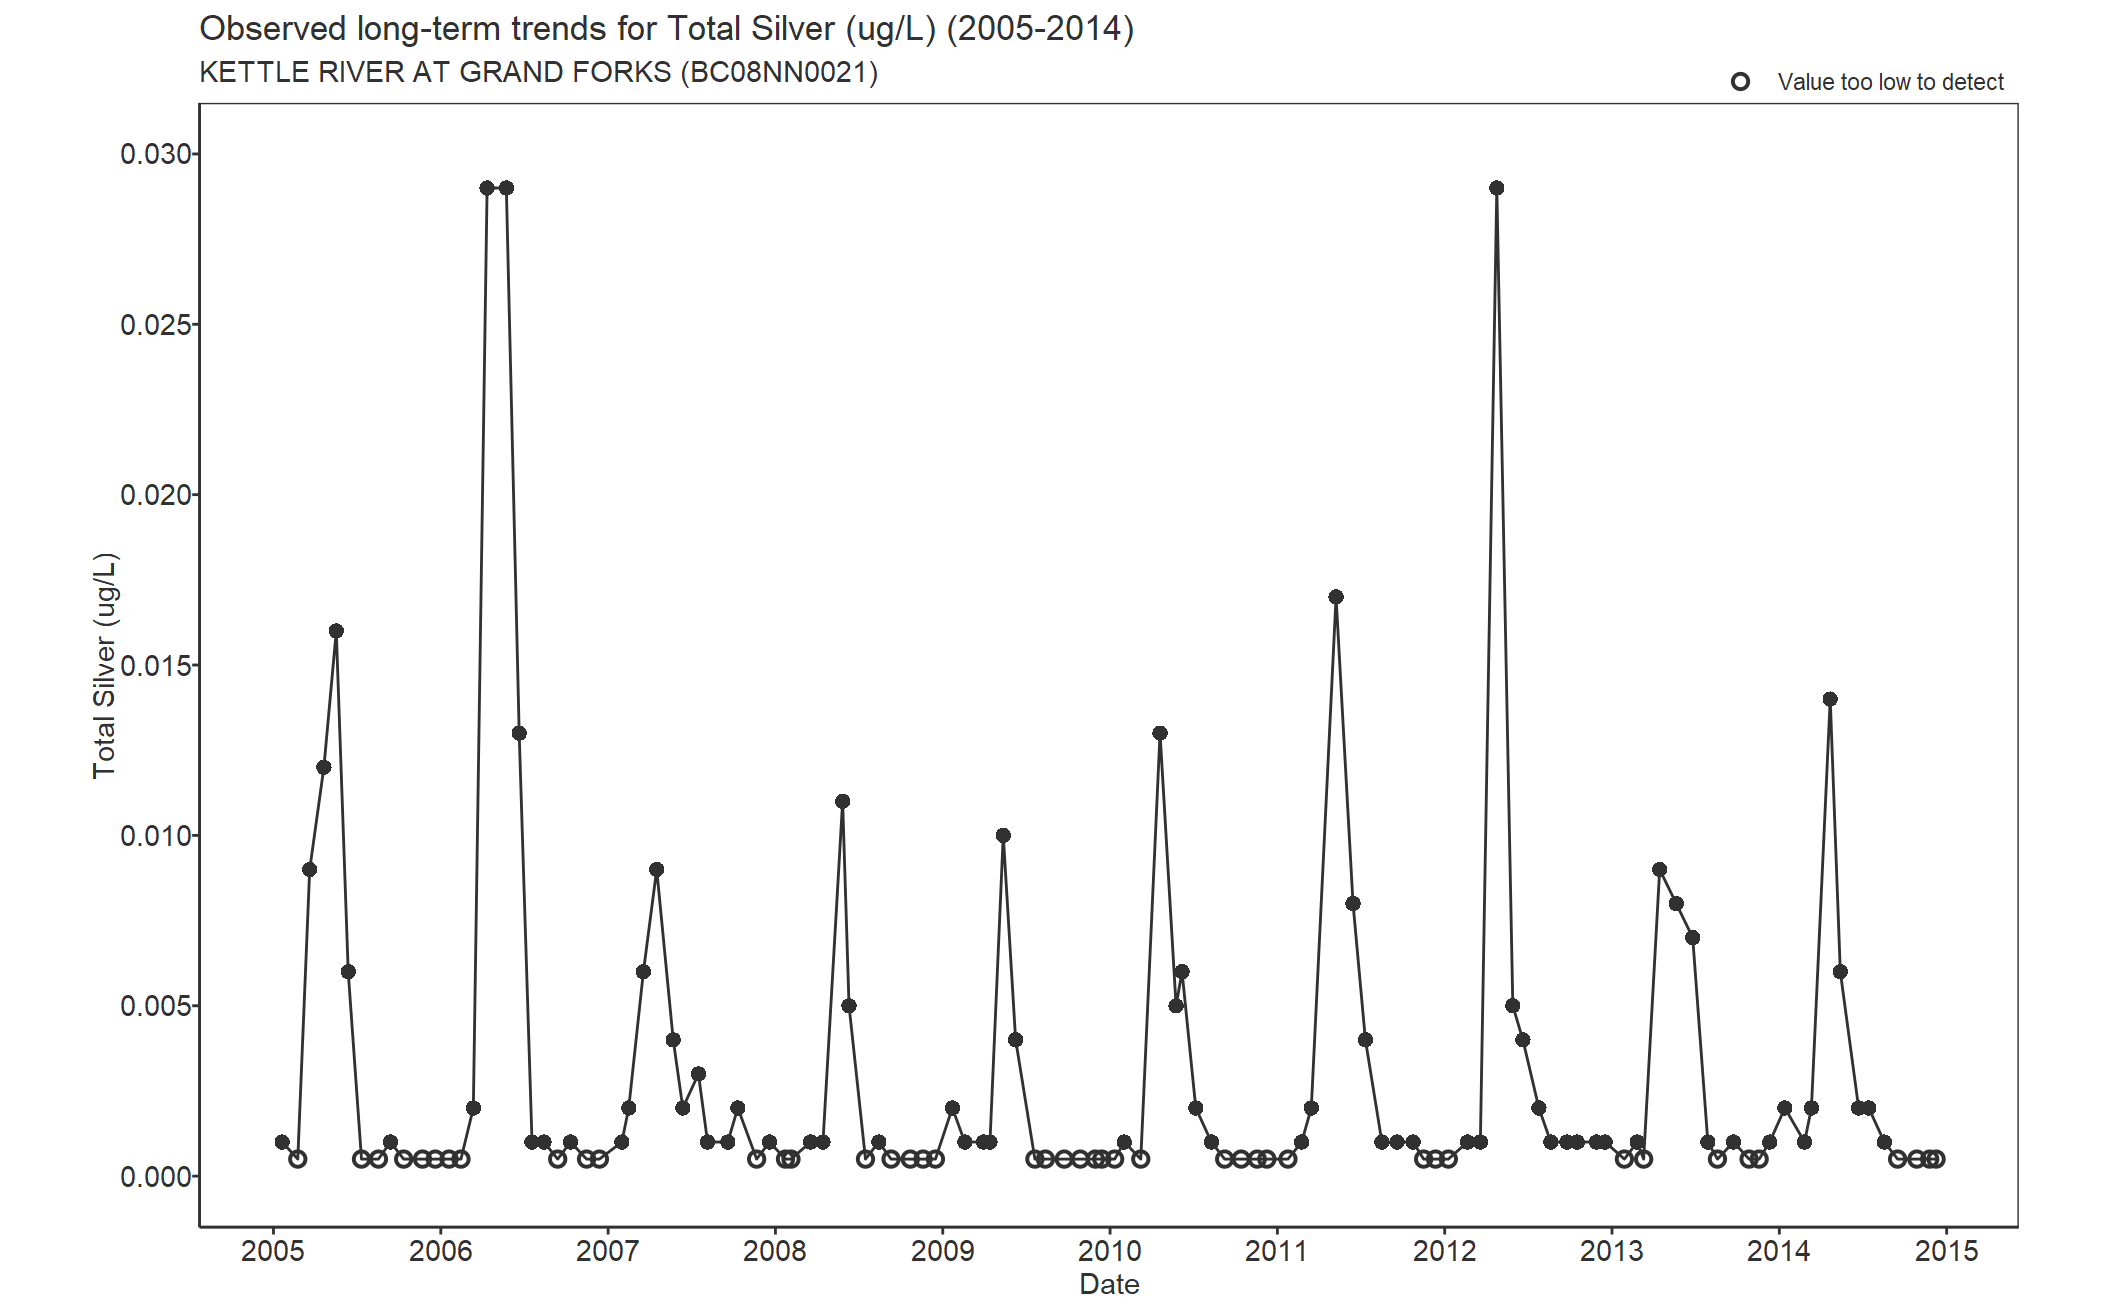 Observed long-term trends for Silver Total (2005-2014)